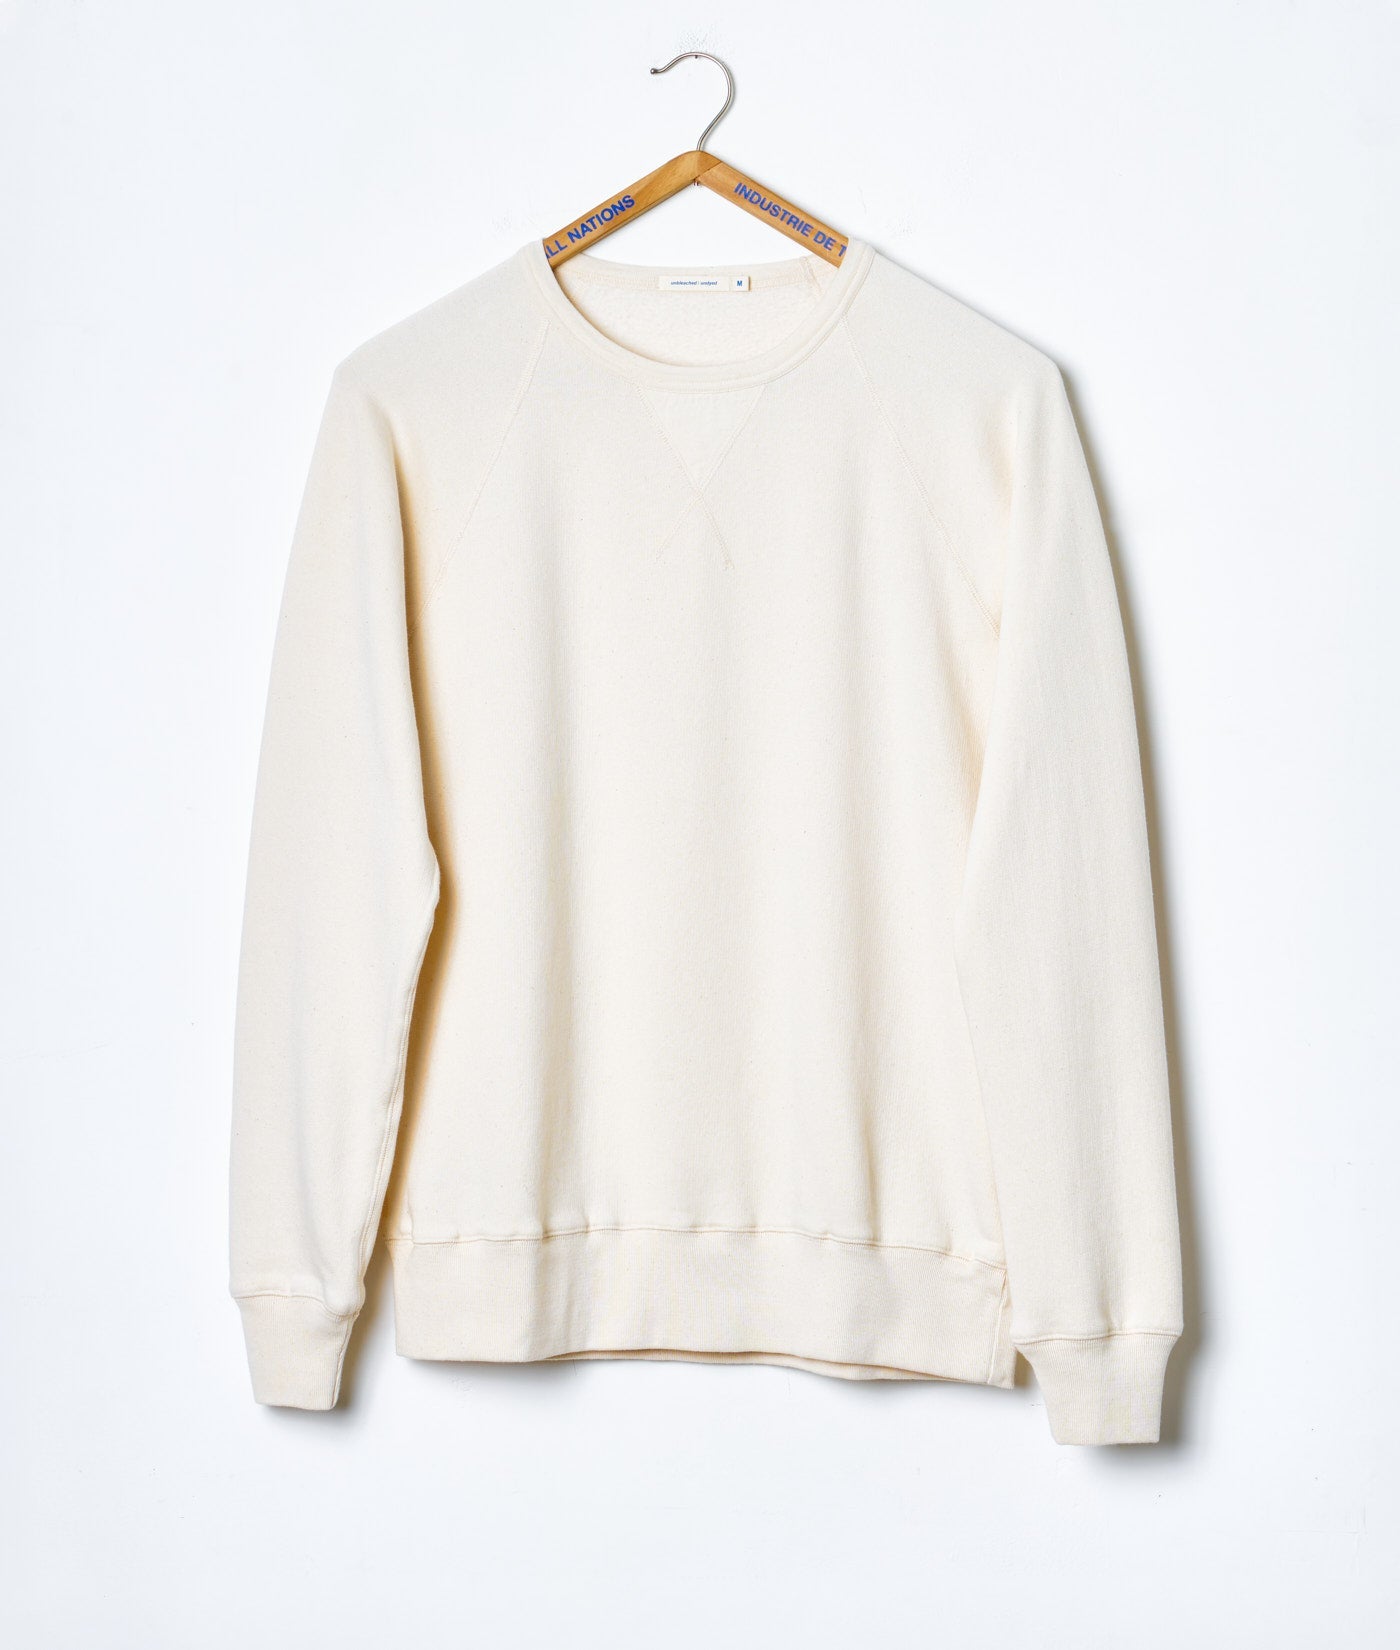 Industry of All Nations Super Sweatshirt, Undyed